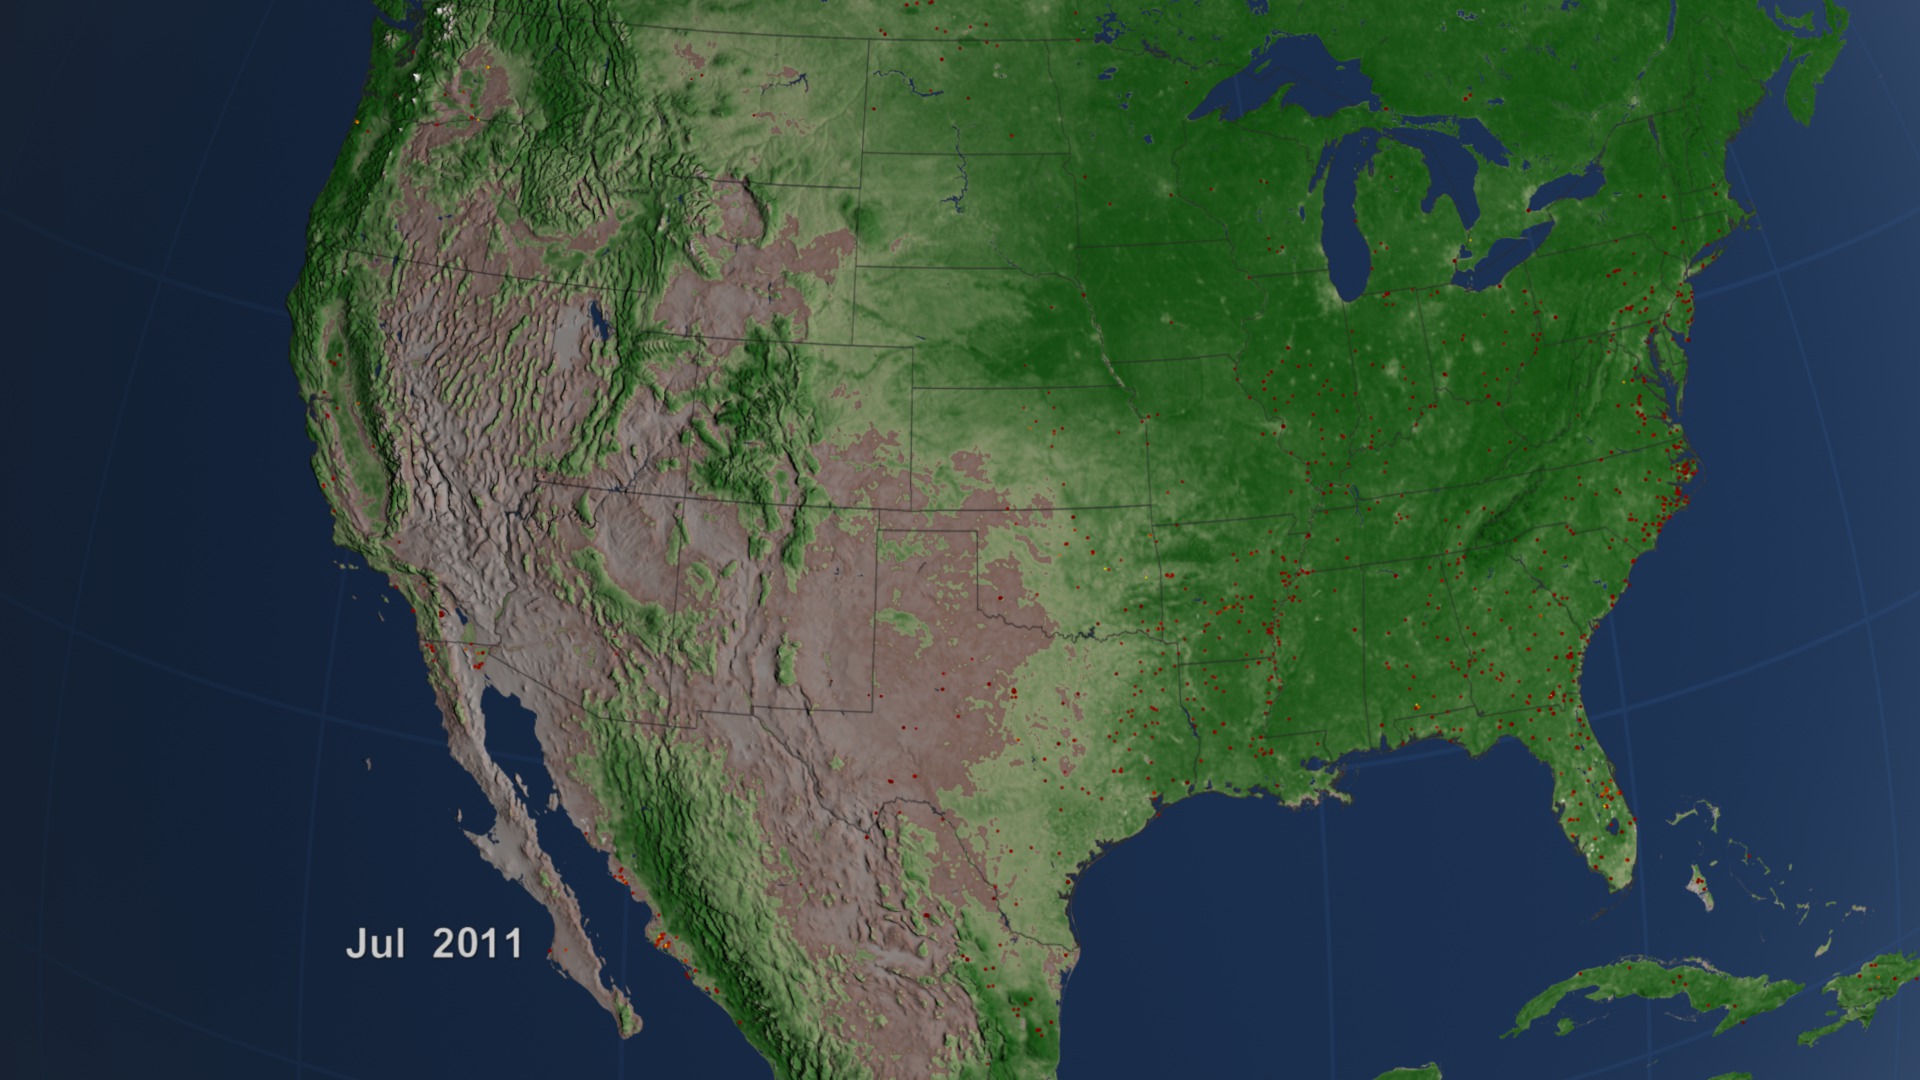 This animation shows fires over NDVI over the United States from July 2002 through July 2011.